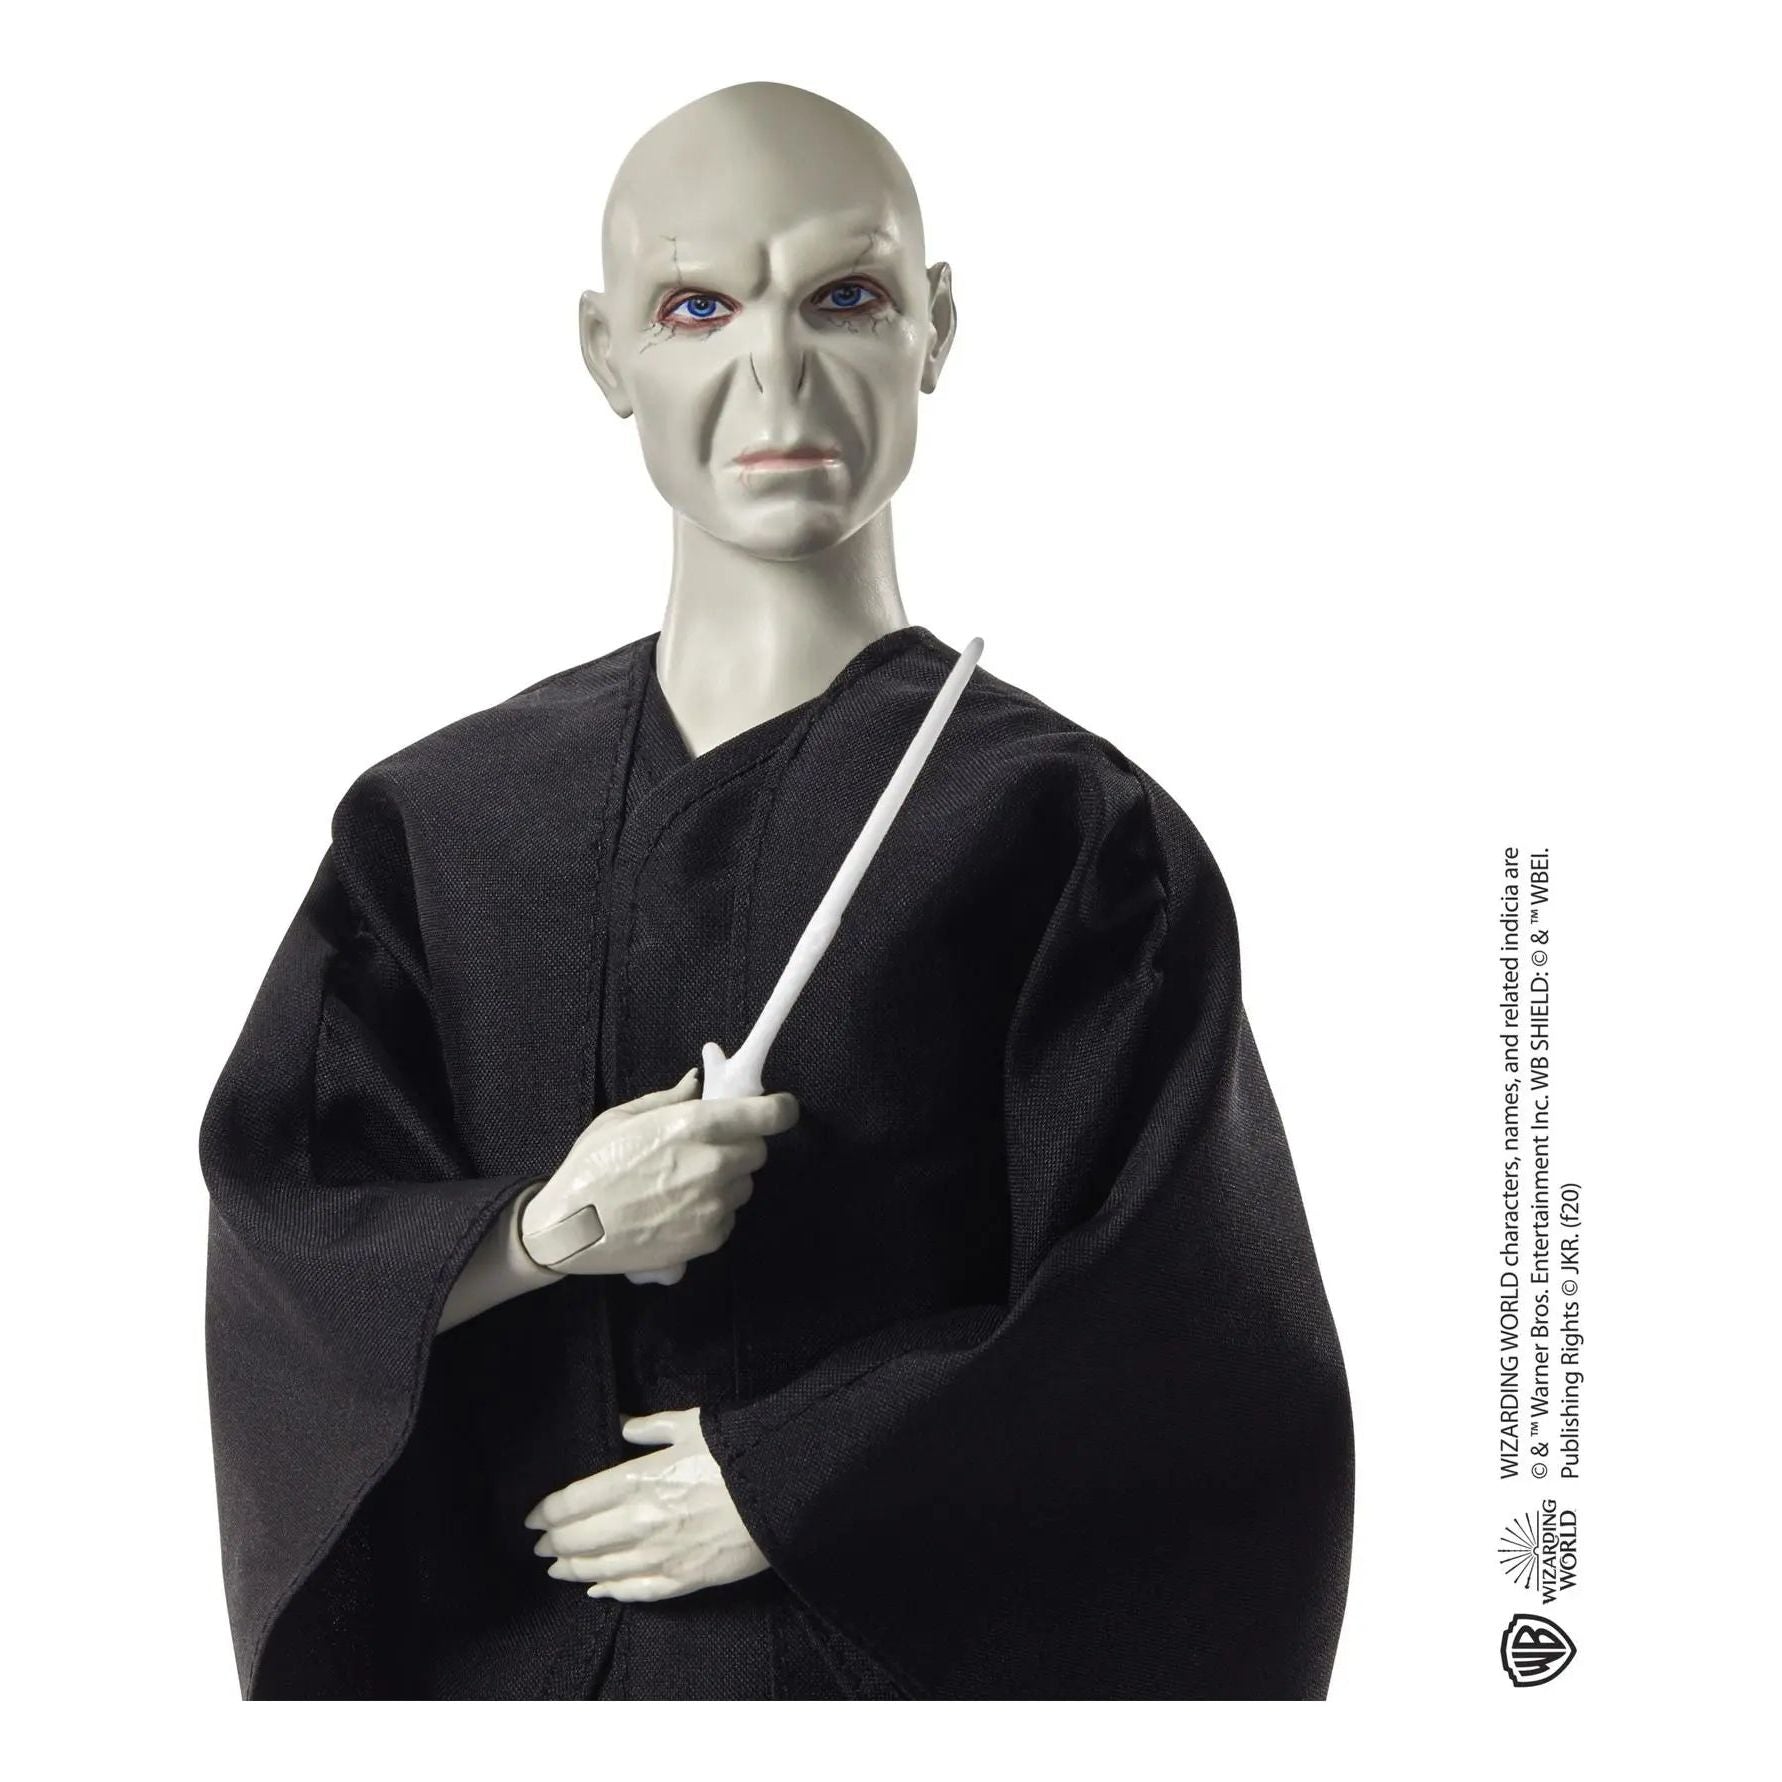 Harry Potter Lord Voldemort Doll Harry Potter